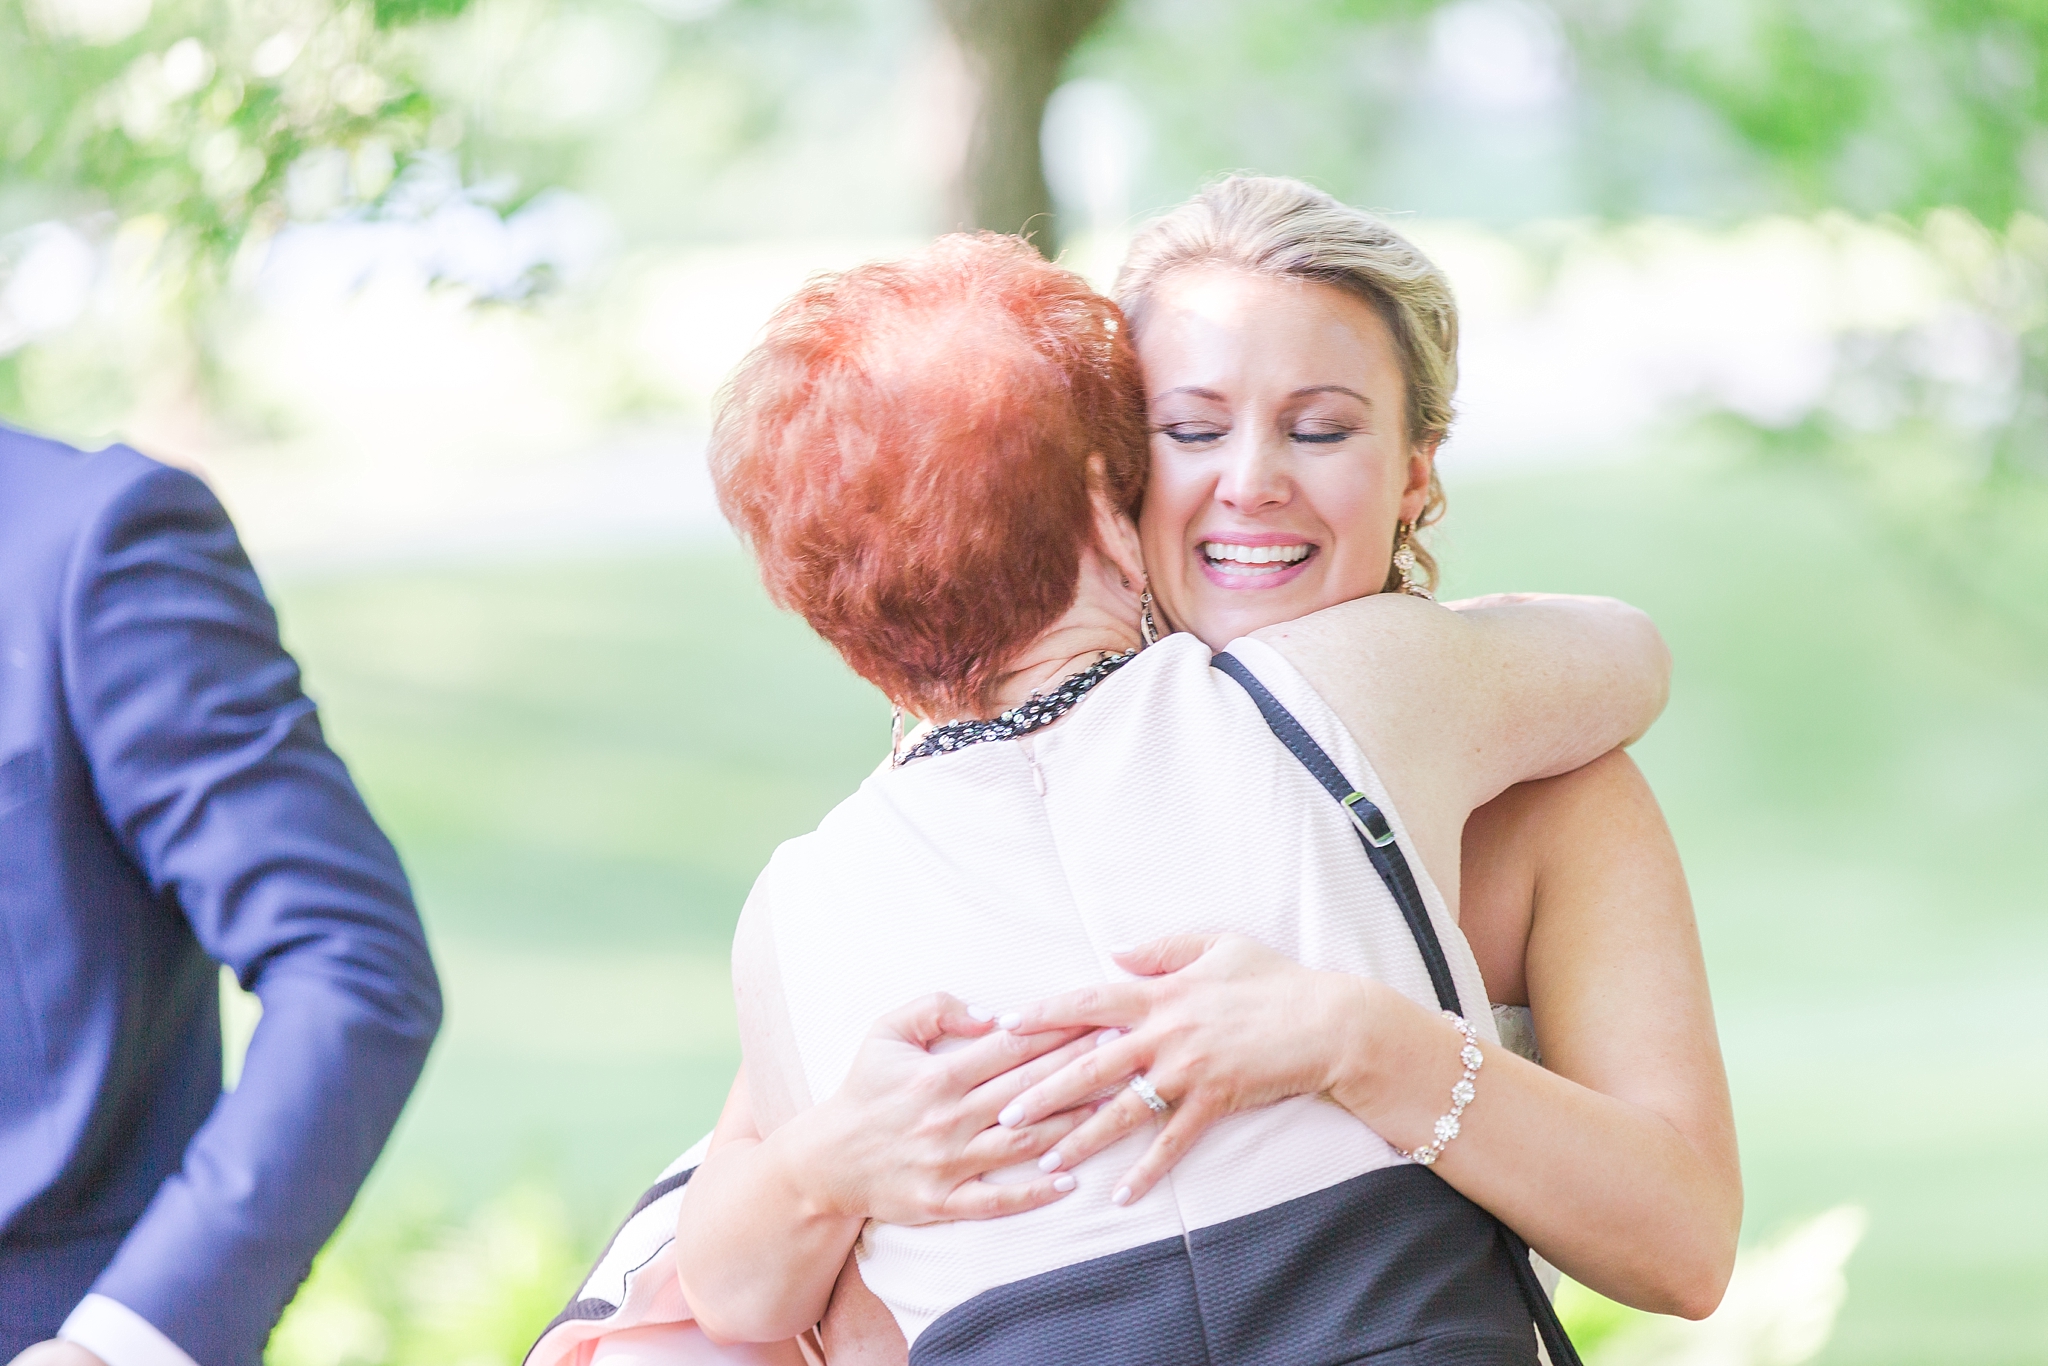 fun-candid-laid-back-wedding-photos-at-wellers-carriage-house-in-saline-michigan-and-at-the-eagle-crest-golf-resort-by-courtney-carolyn-photography_0075.jpg